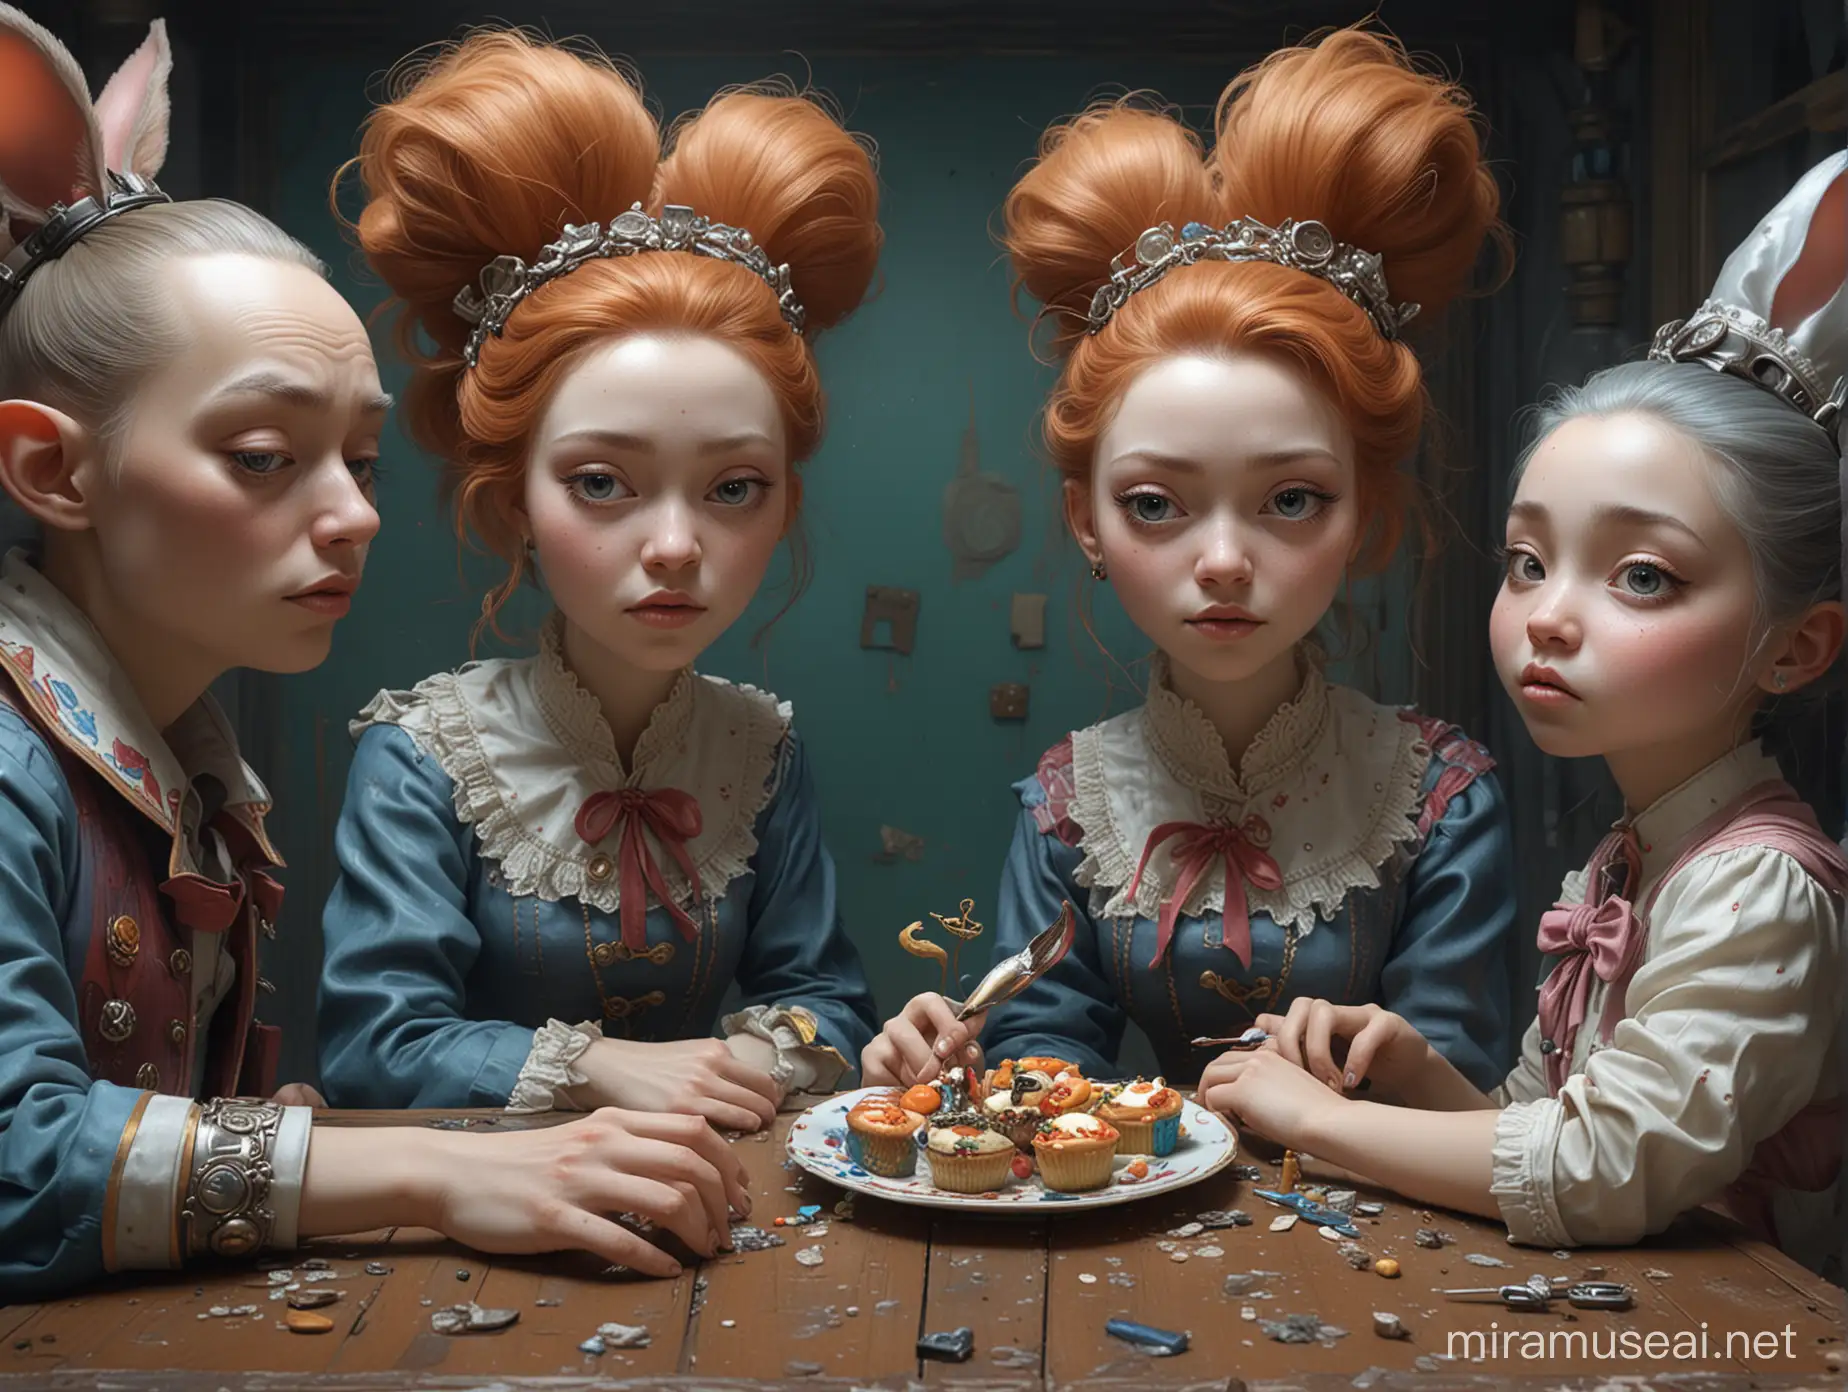 Surreal Tea Party with Bizarre Artistic Elements